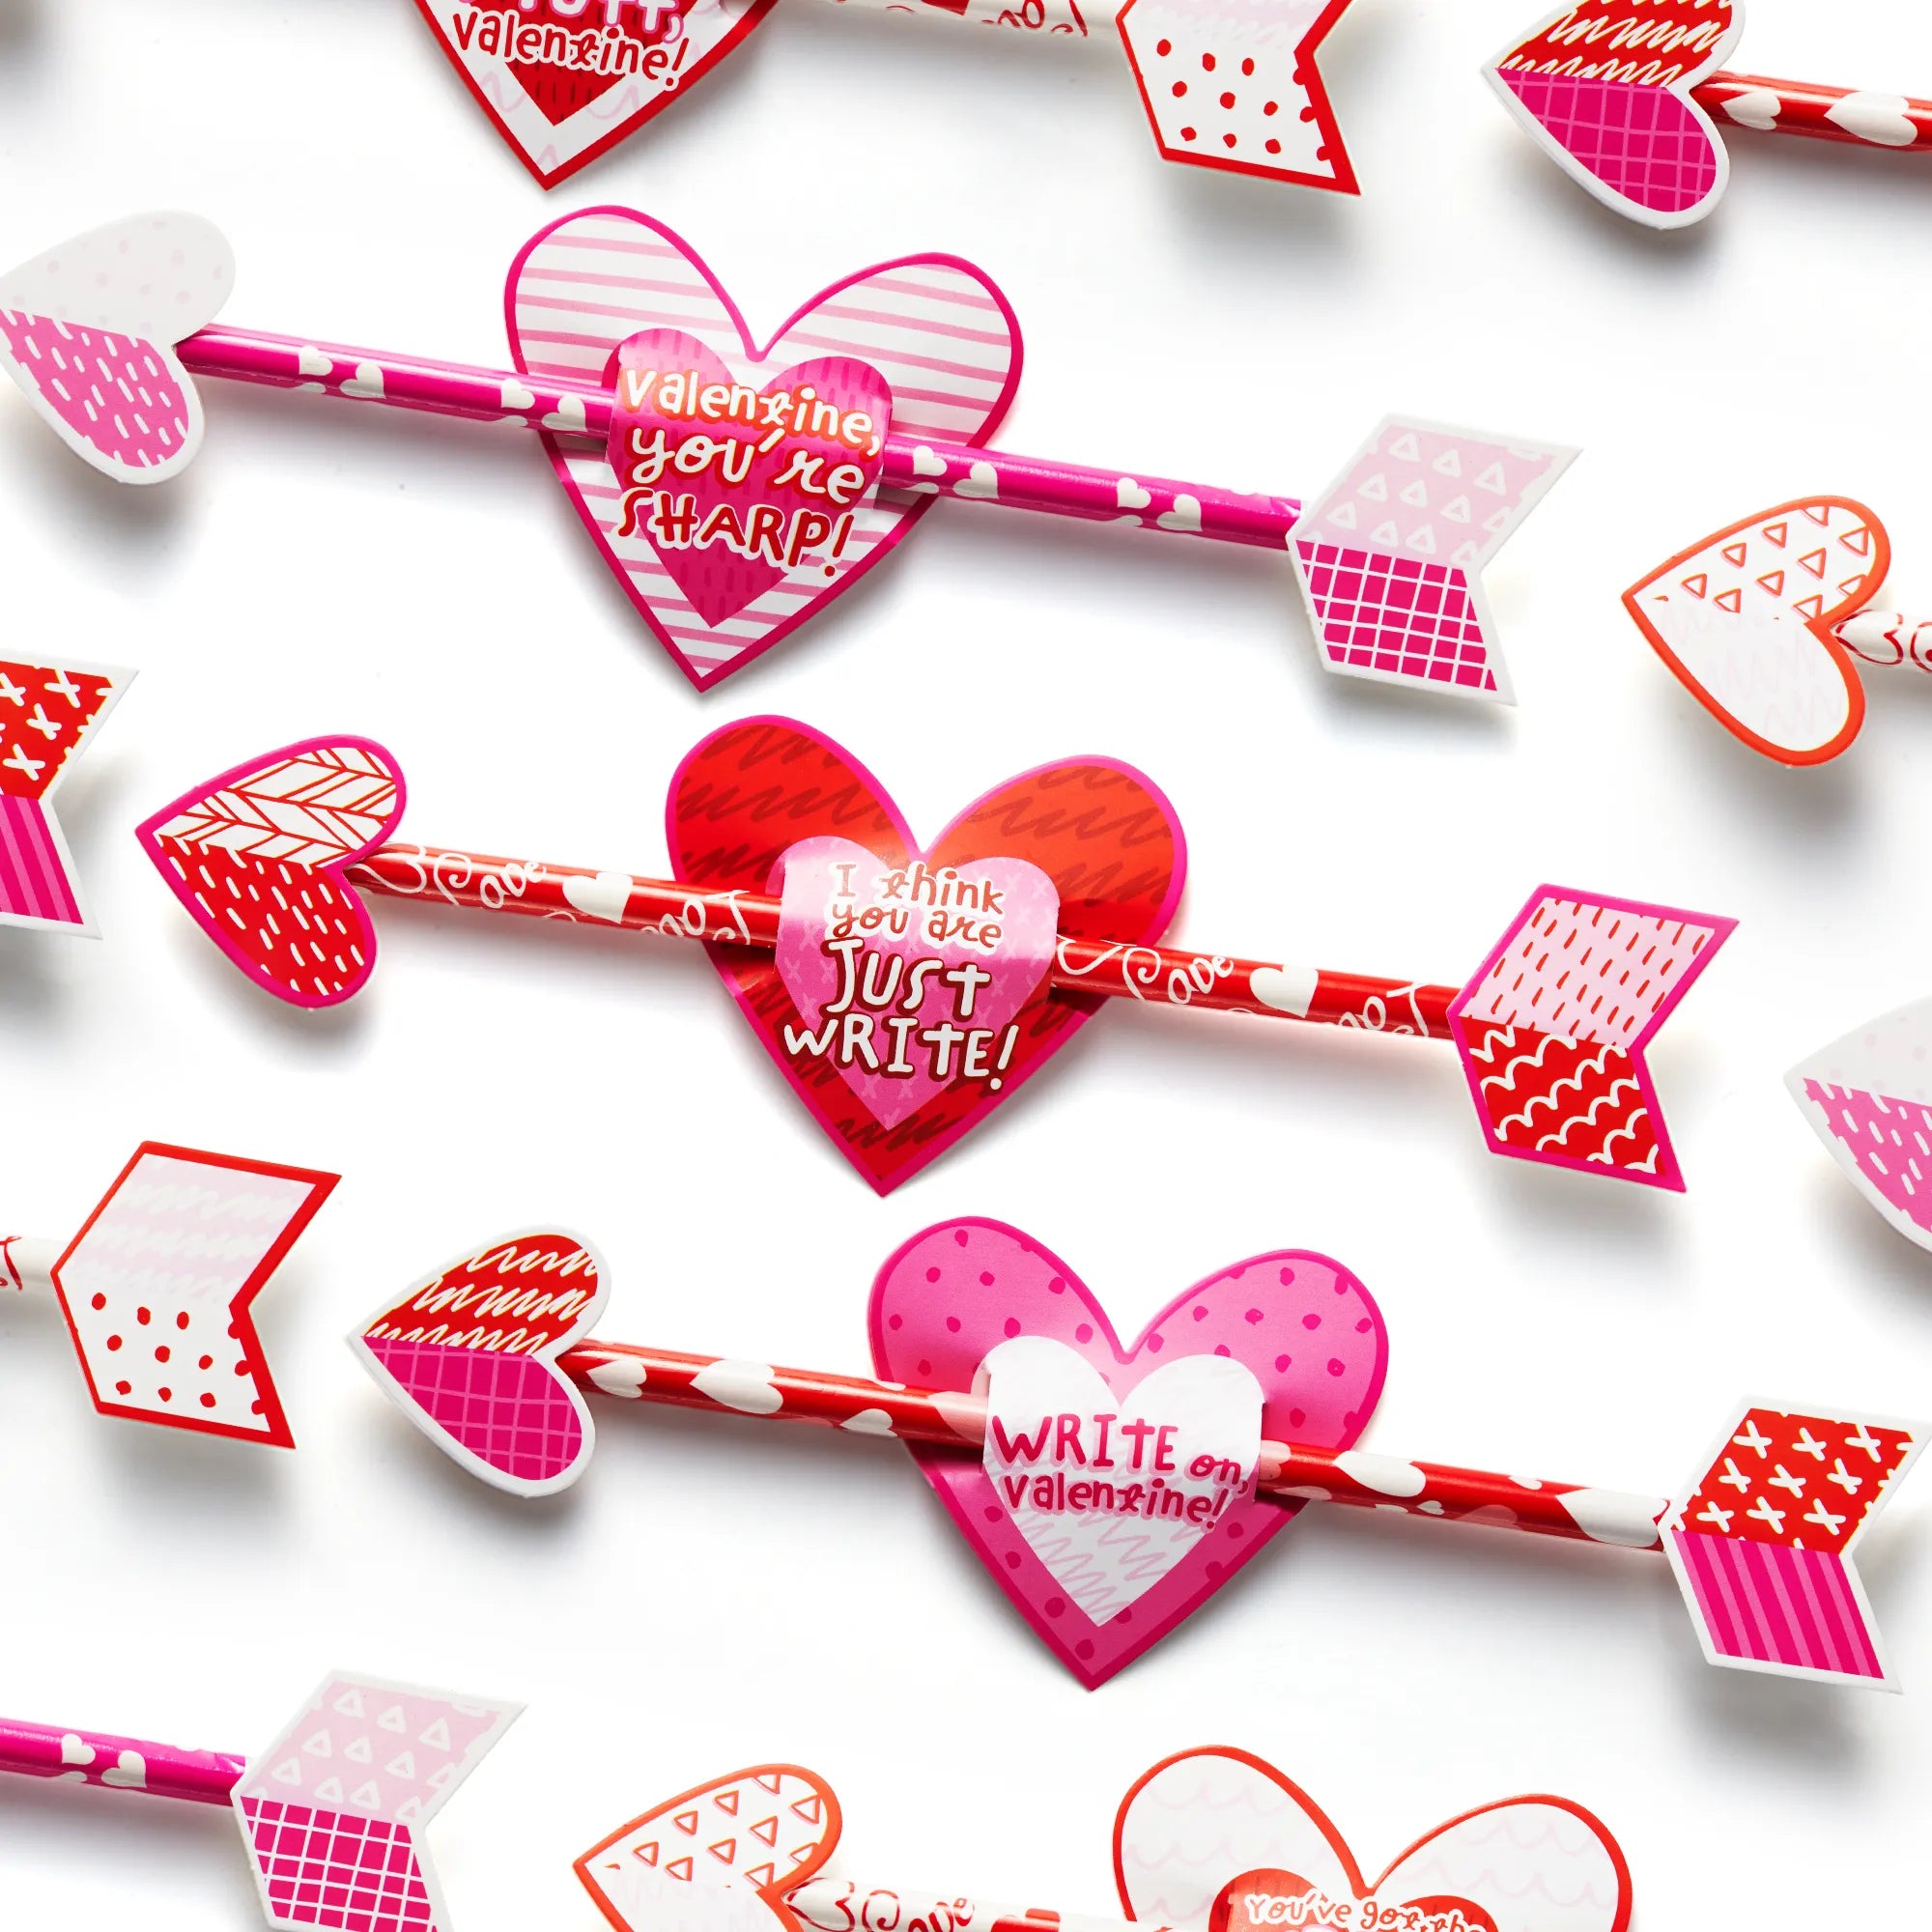 Joyin 28 Packs Bendy Pencils With Valentines Day Cards For Kids-classroom  Exchange Gifts, Valentine's Party Favors : Target